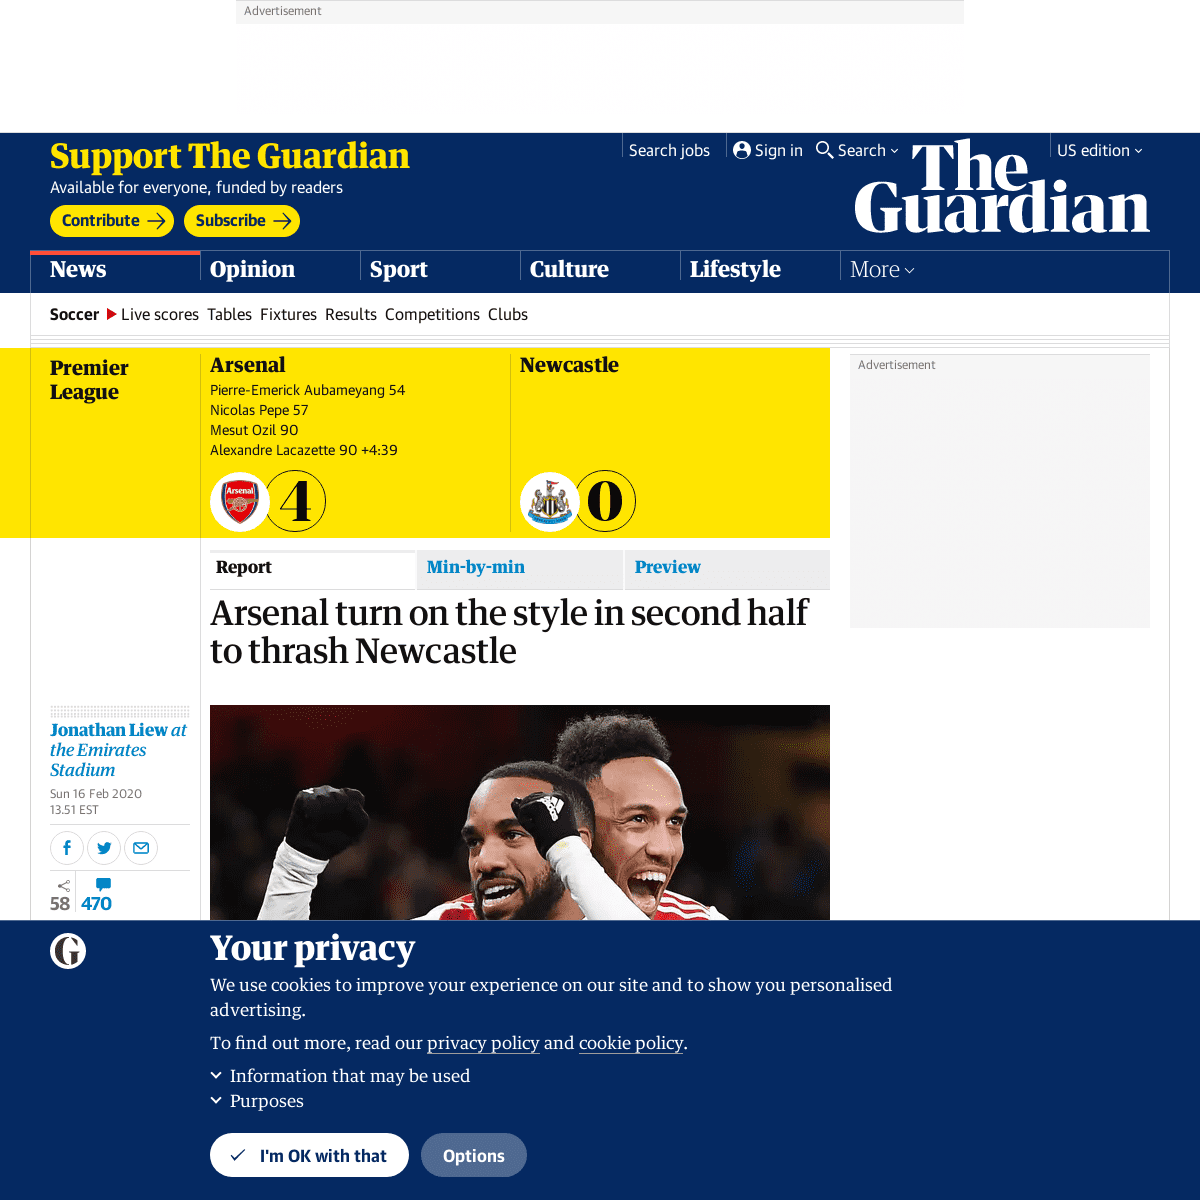 A complete backup of www.theguardian.com/football/2020/feb/16/arsenal-turn-on-the-style-in-second-half-to-thrash-newcastle